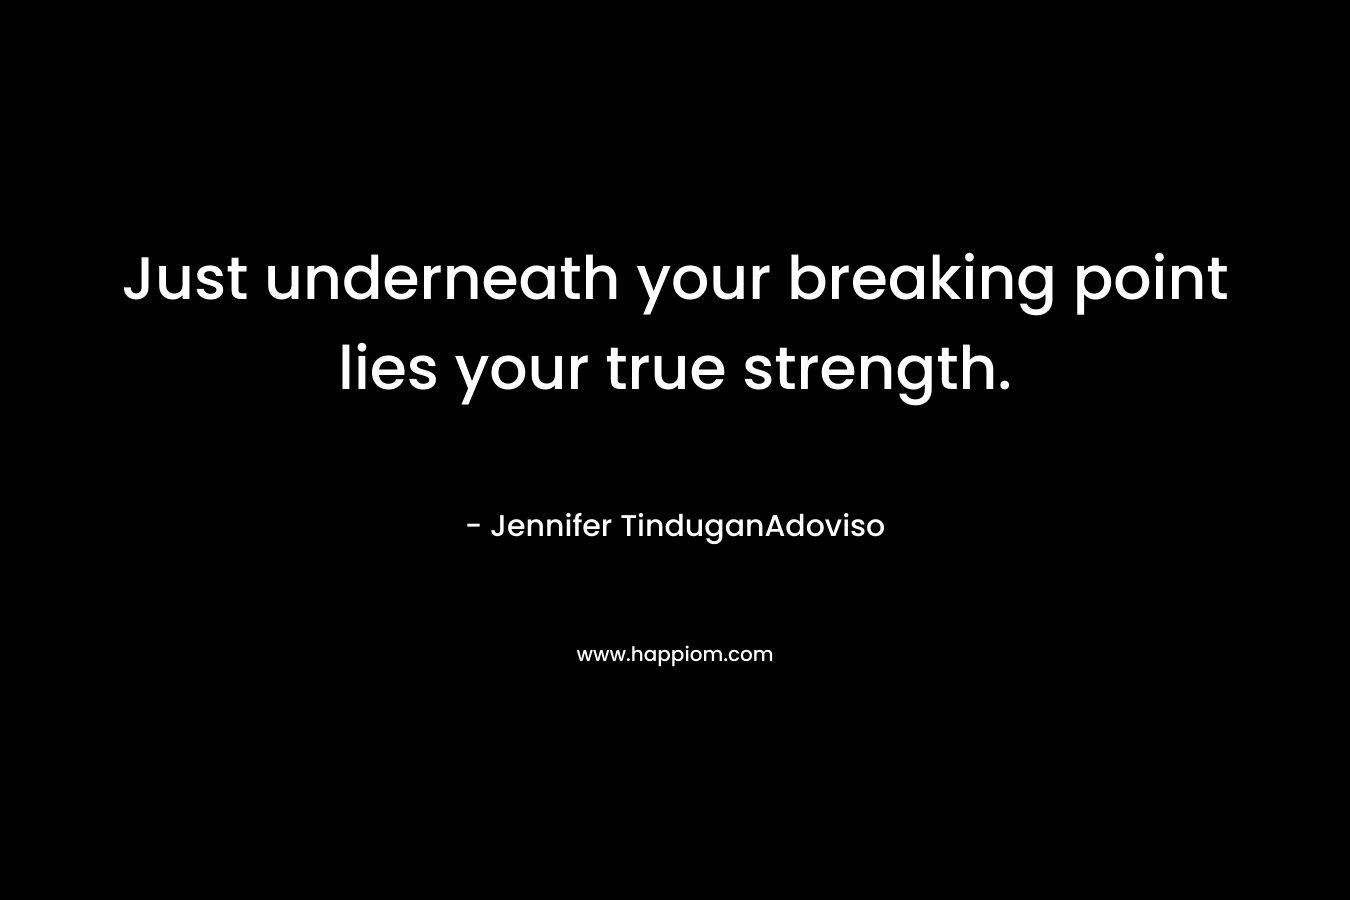 Just underneath your breaking point lies your true strength.